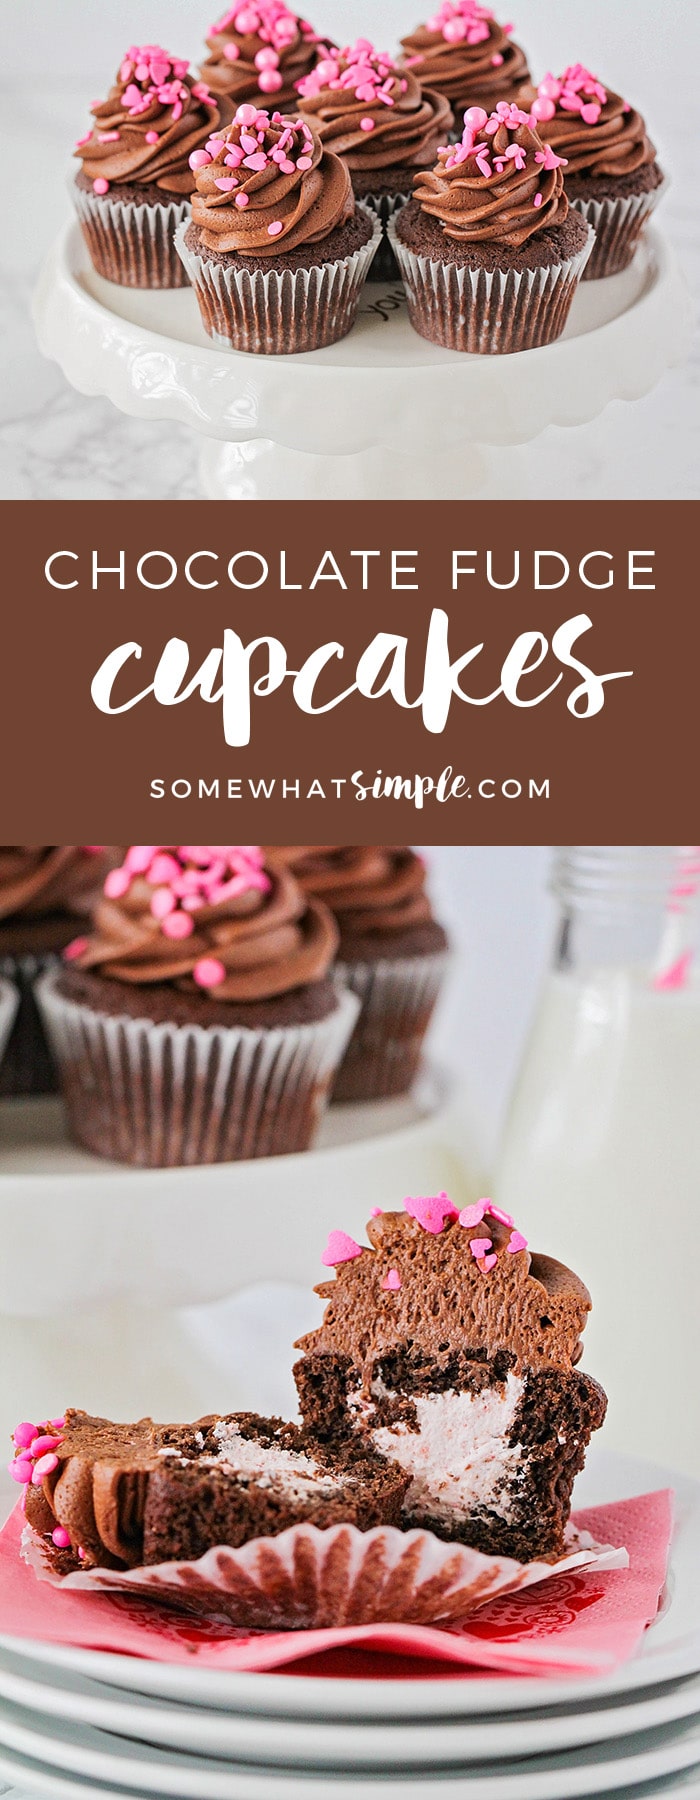 These delicious chocolate fudge cupcakes just might change the way you make cupcakes forever!!! via @somewhatsimple